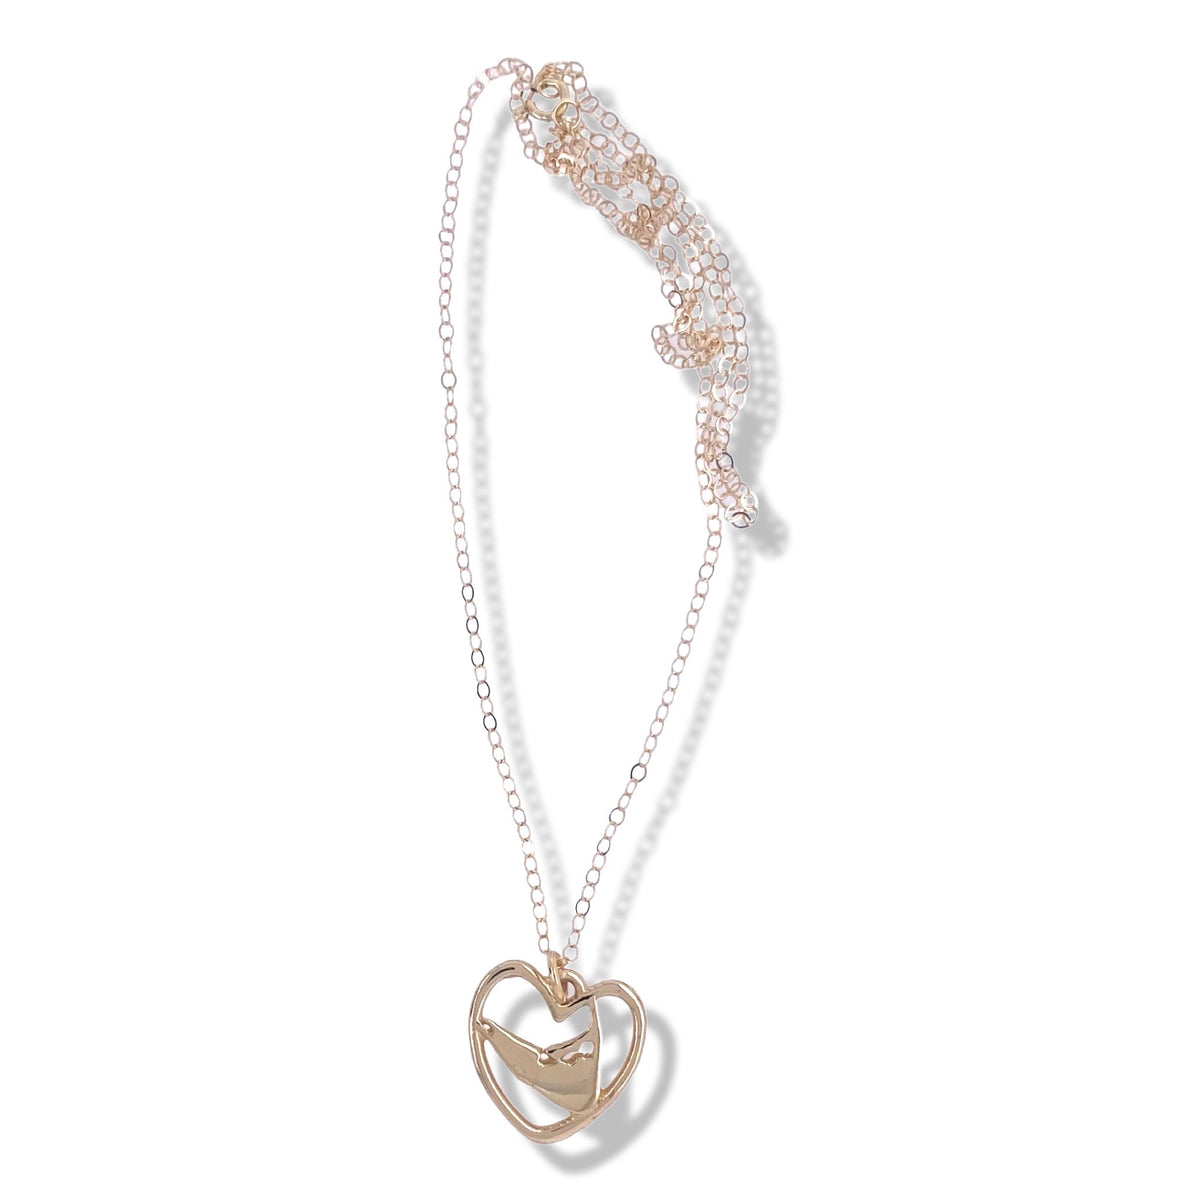 SCONSET NANTUCKET HEART NECKLACE IN 14K GOLD ©